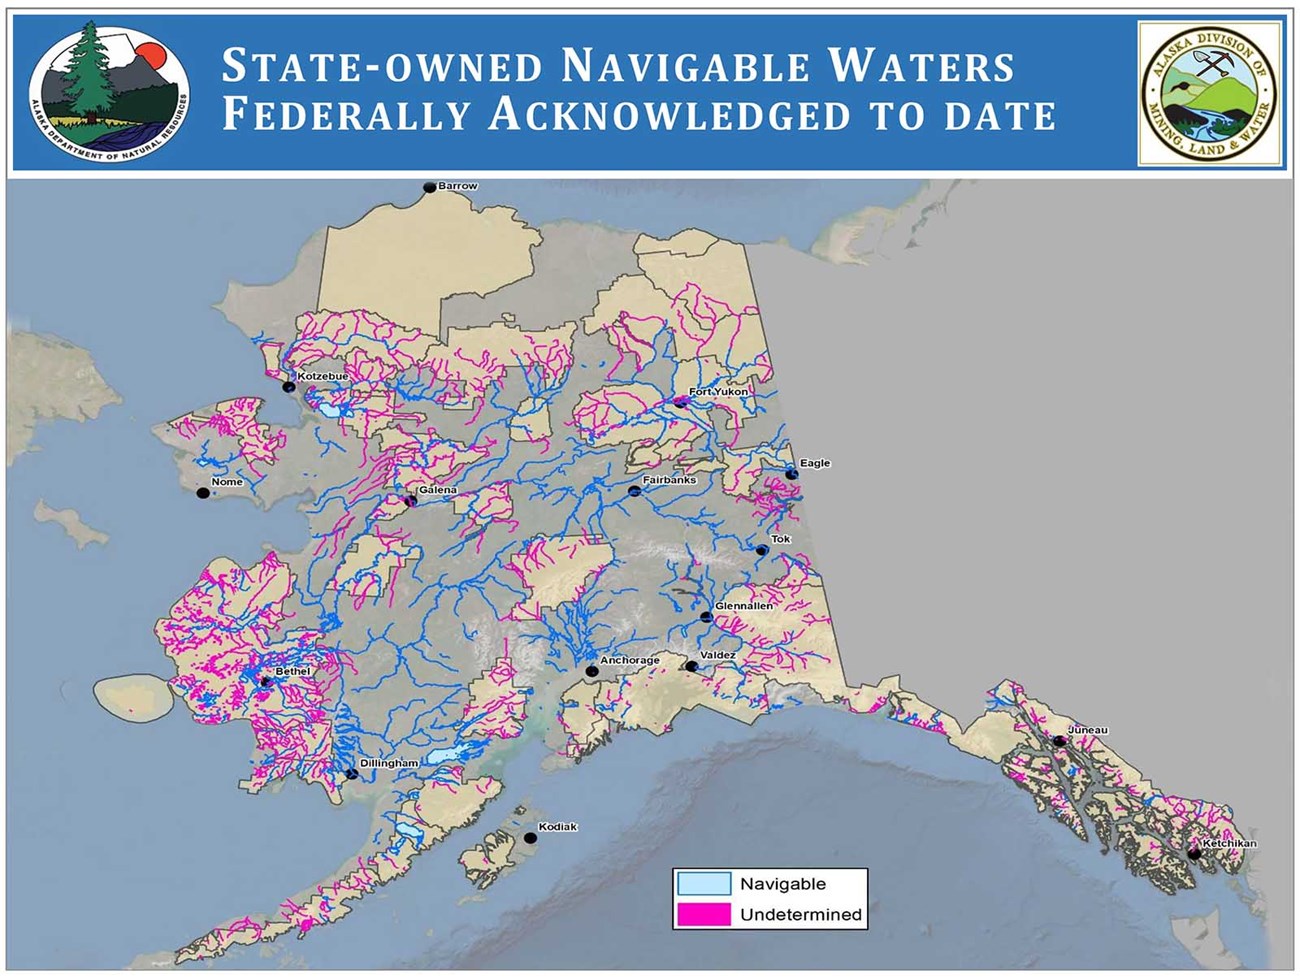 A map showing navigable and undetermined waters in Alaska along with park boundaries.